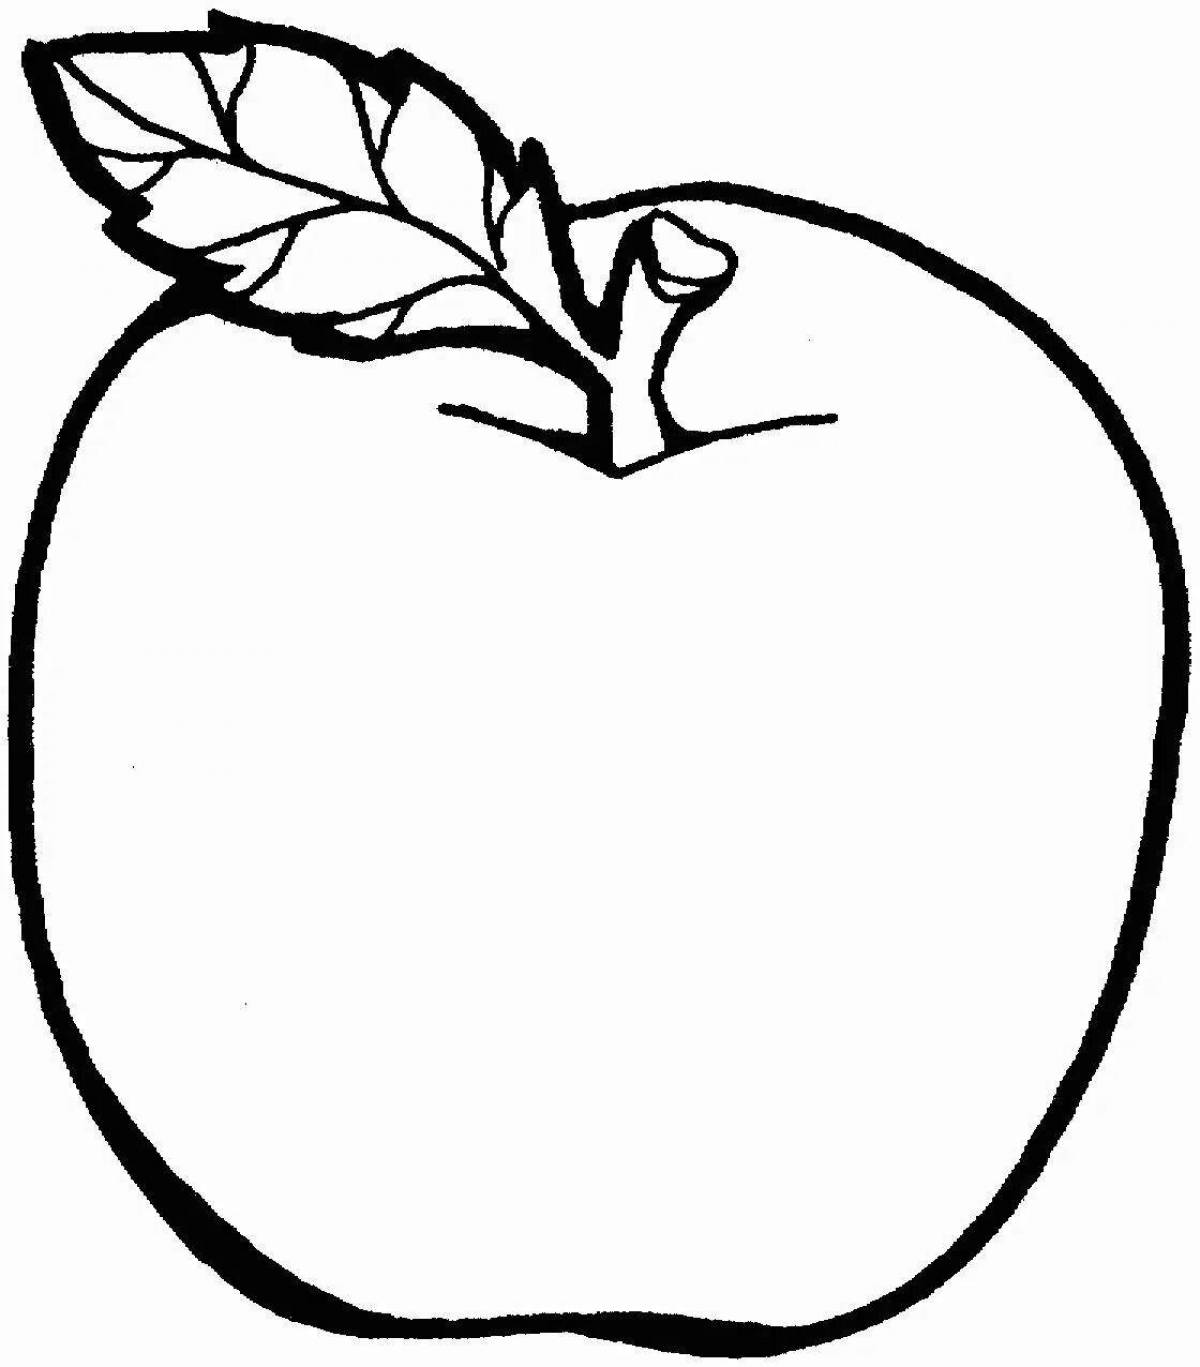 Coloring apple for 4-5 year olds